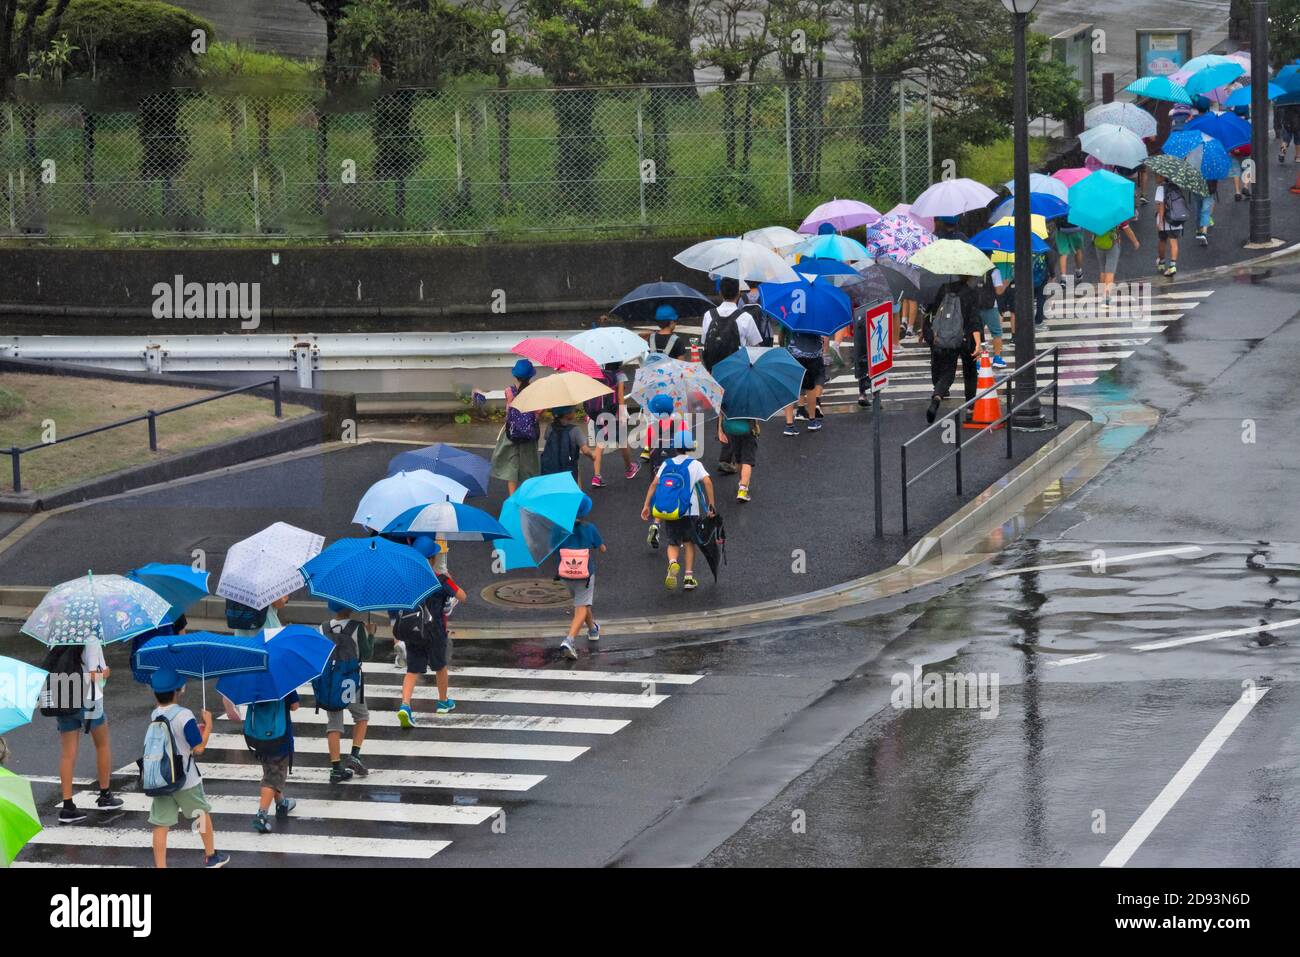 Students with colorful umbrellas crossing the street on a rainy day, Tokyo, Japan Stock Photo